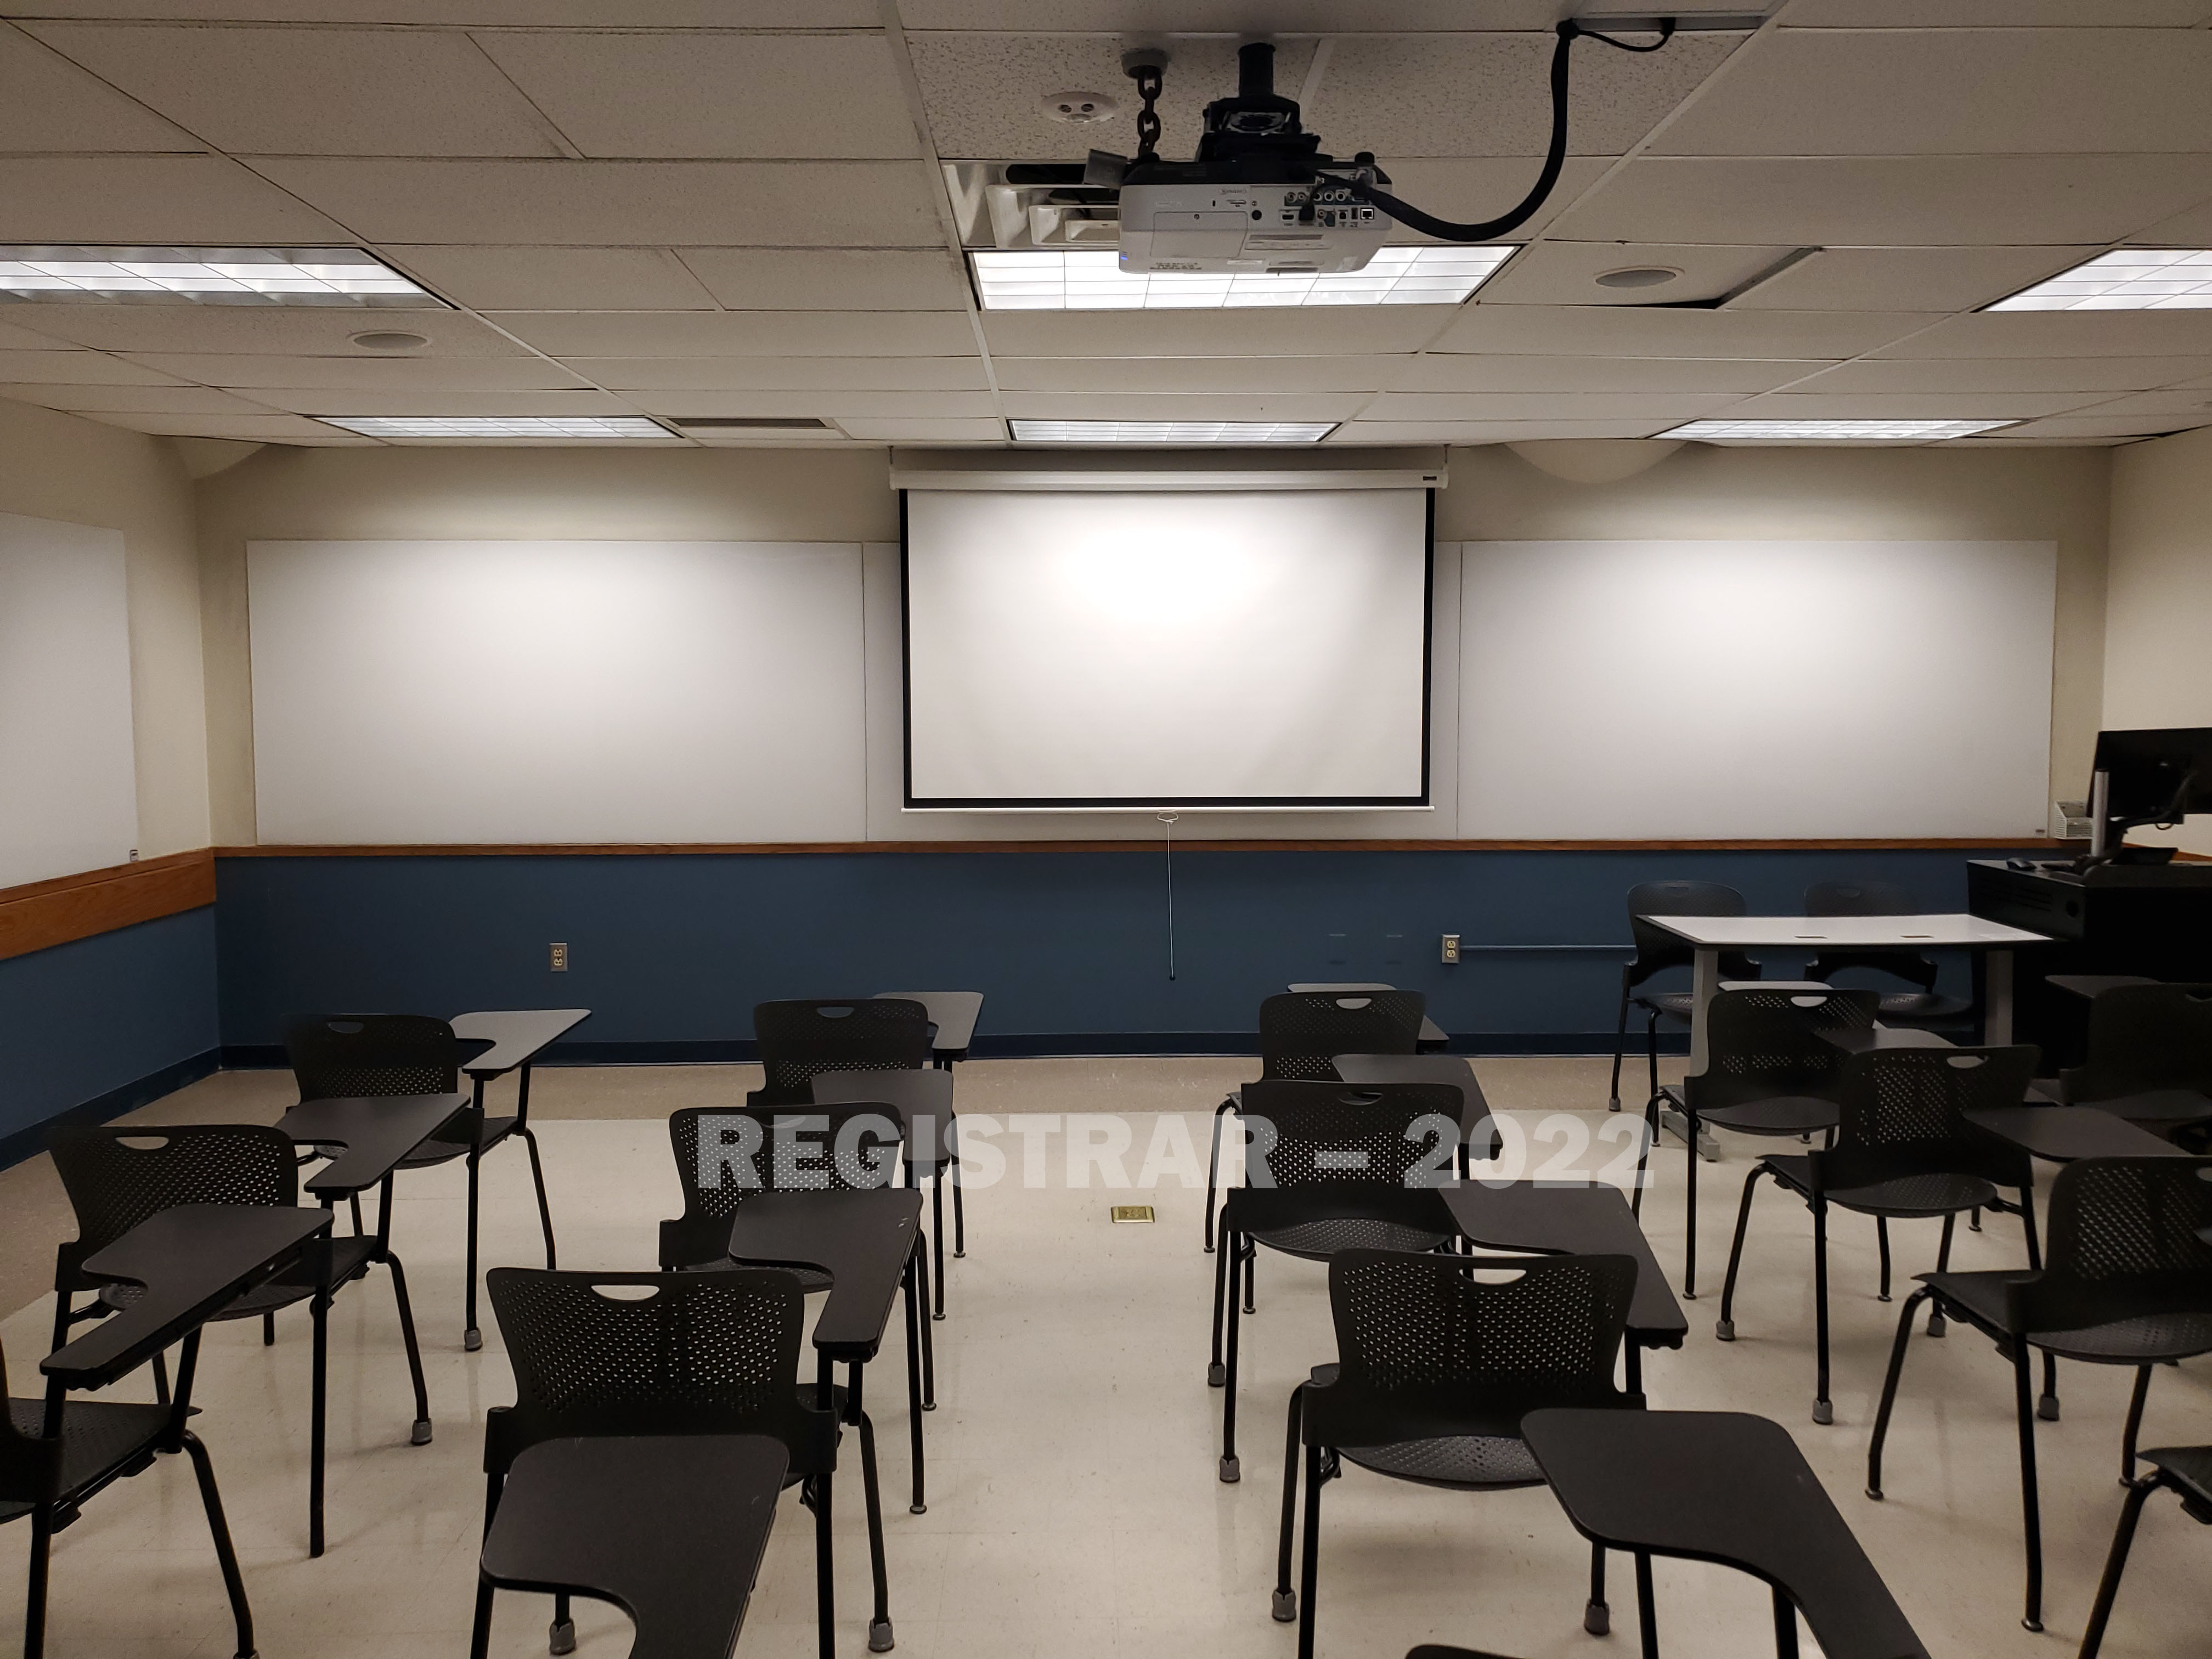 Enarson Classroom Building room 211 view from the back of the room with projector screen down